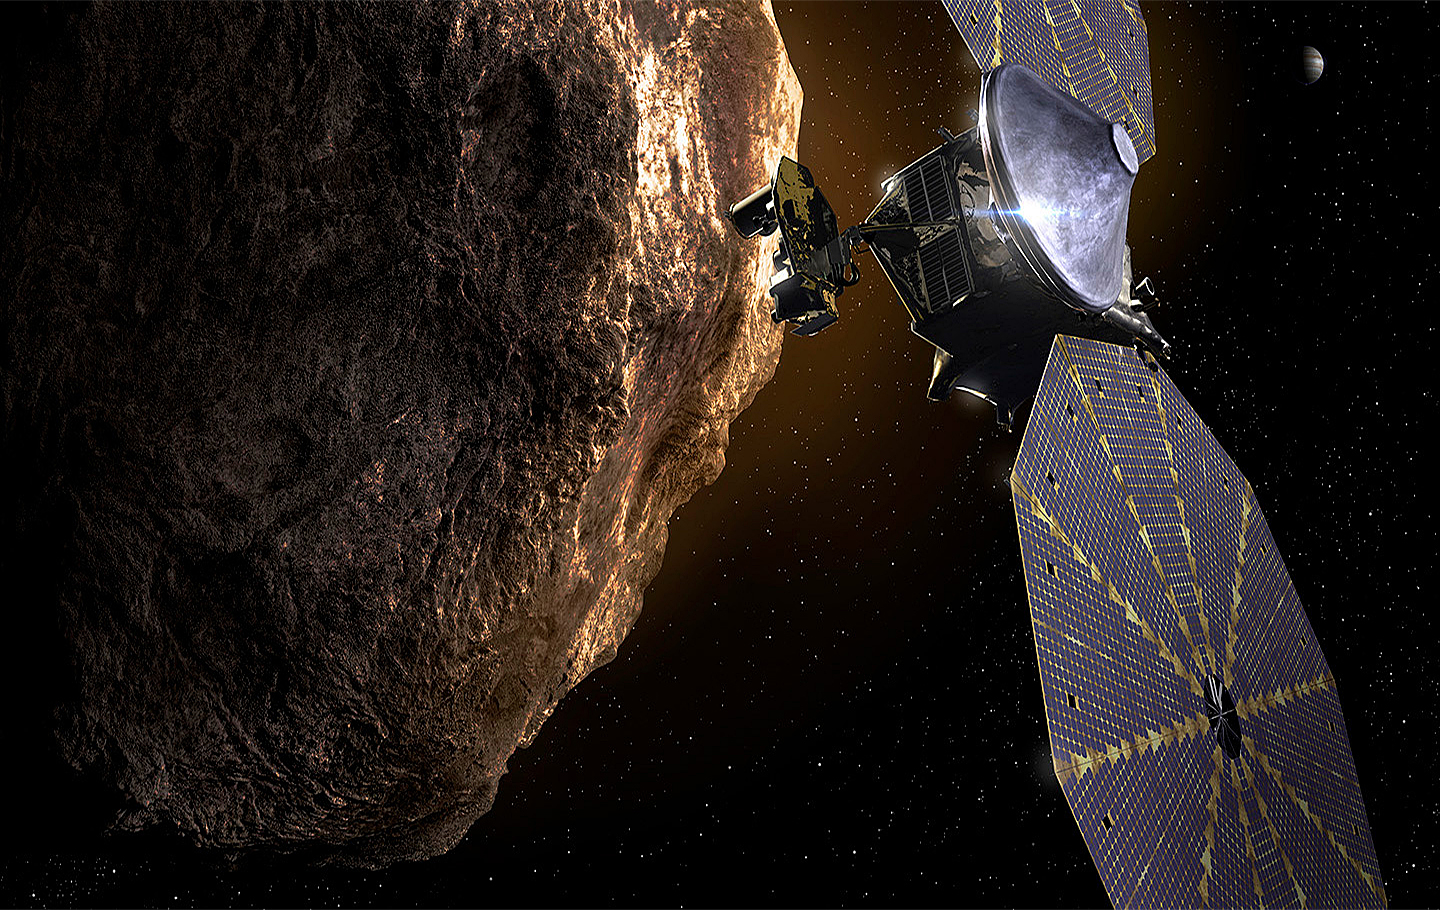 Illustration of Lucy passing an asteroid